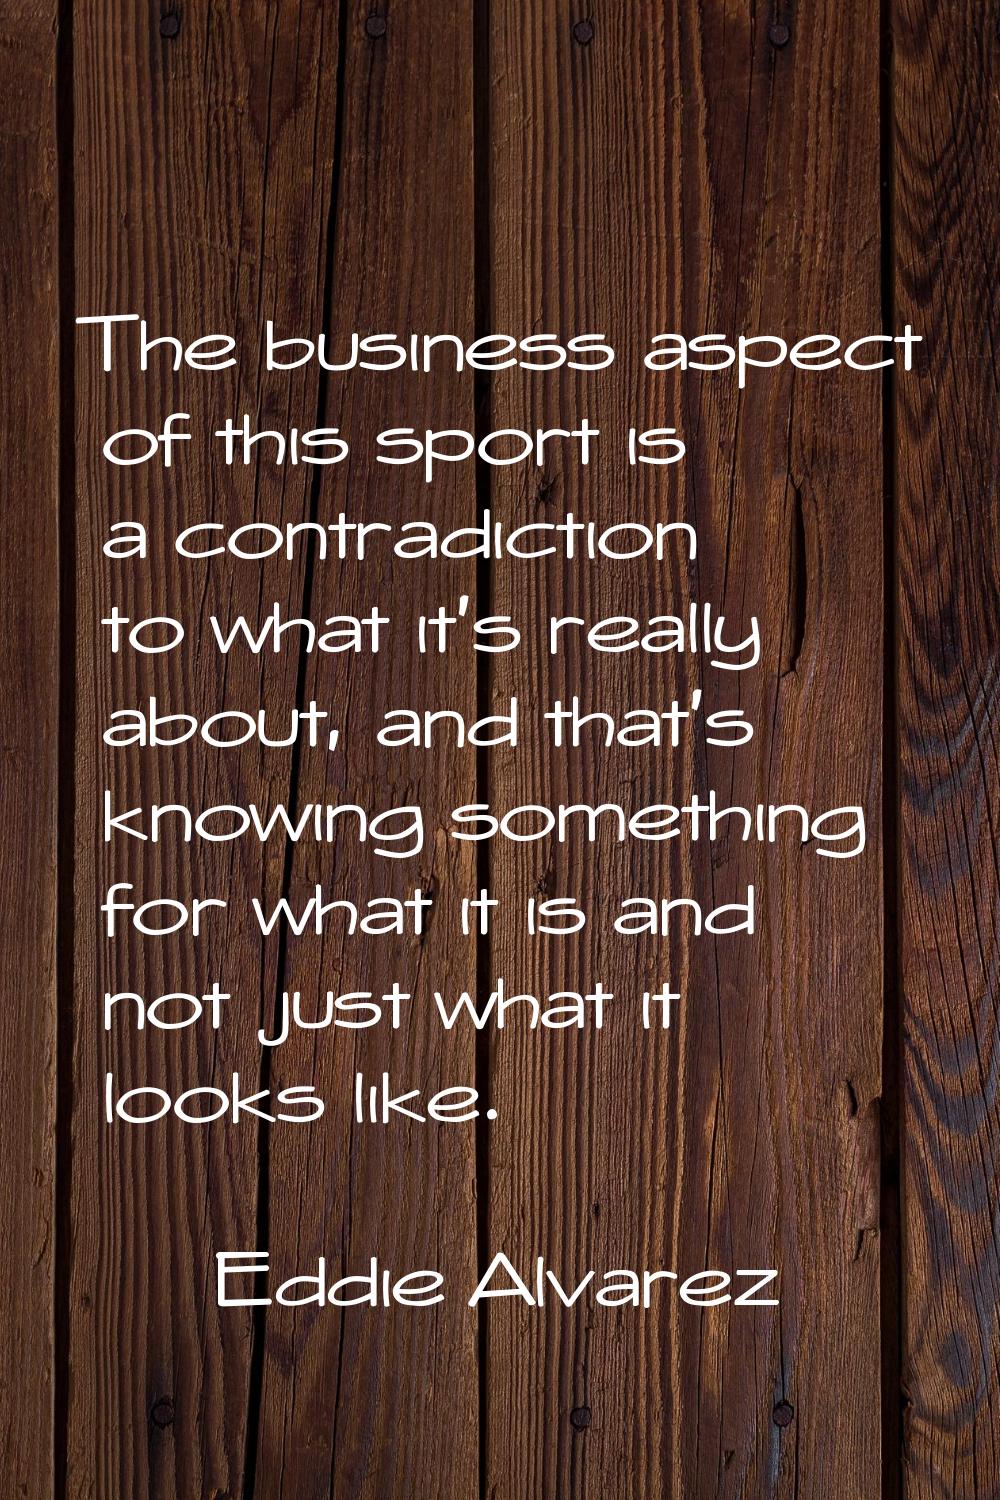 The business aspect of this sport is a contradiction to what it's really about, and that's knowing 